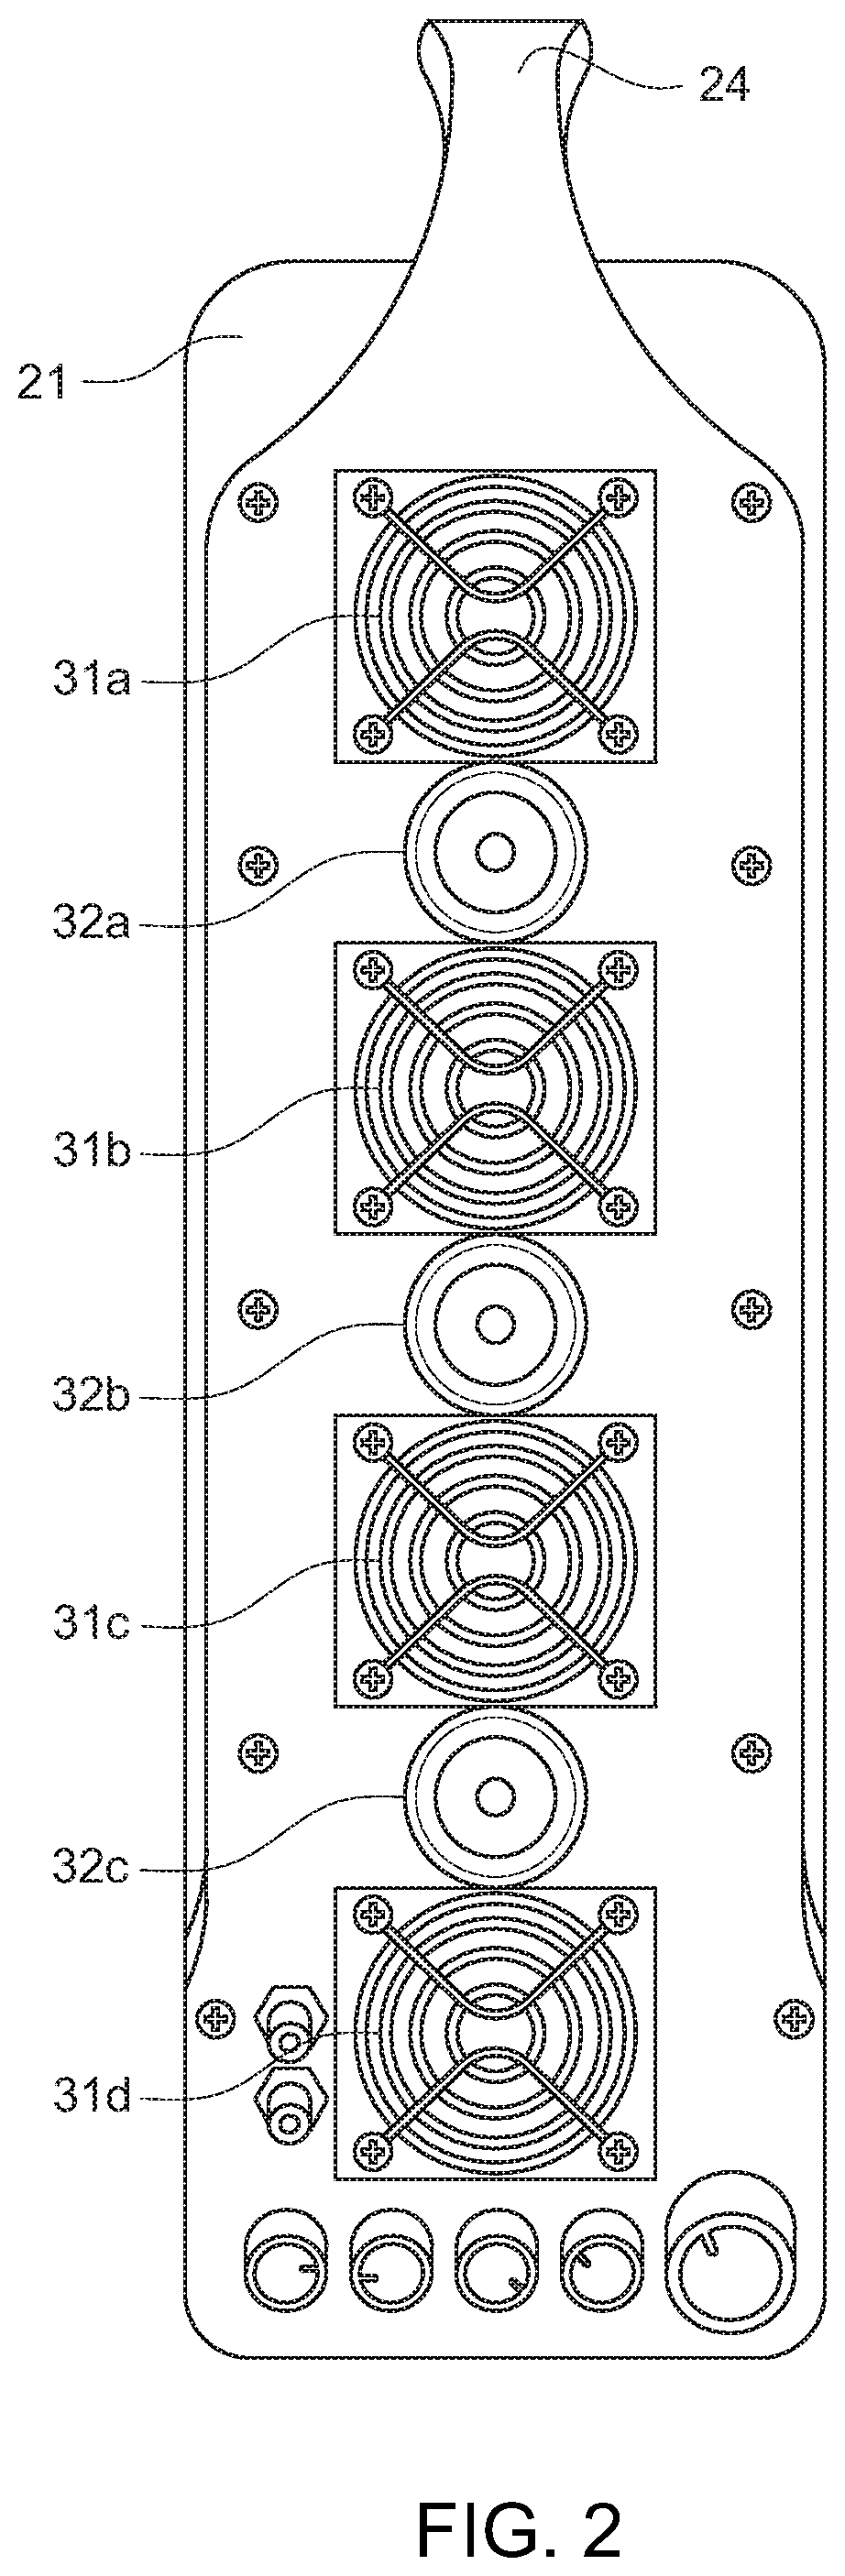 Low-frequency spiral waveguide speaker